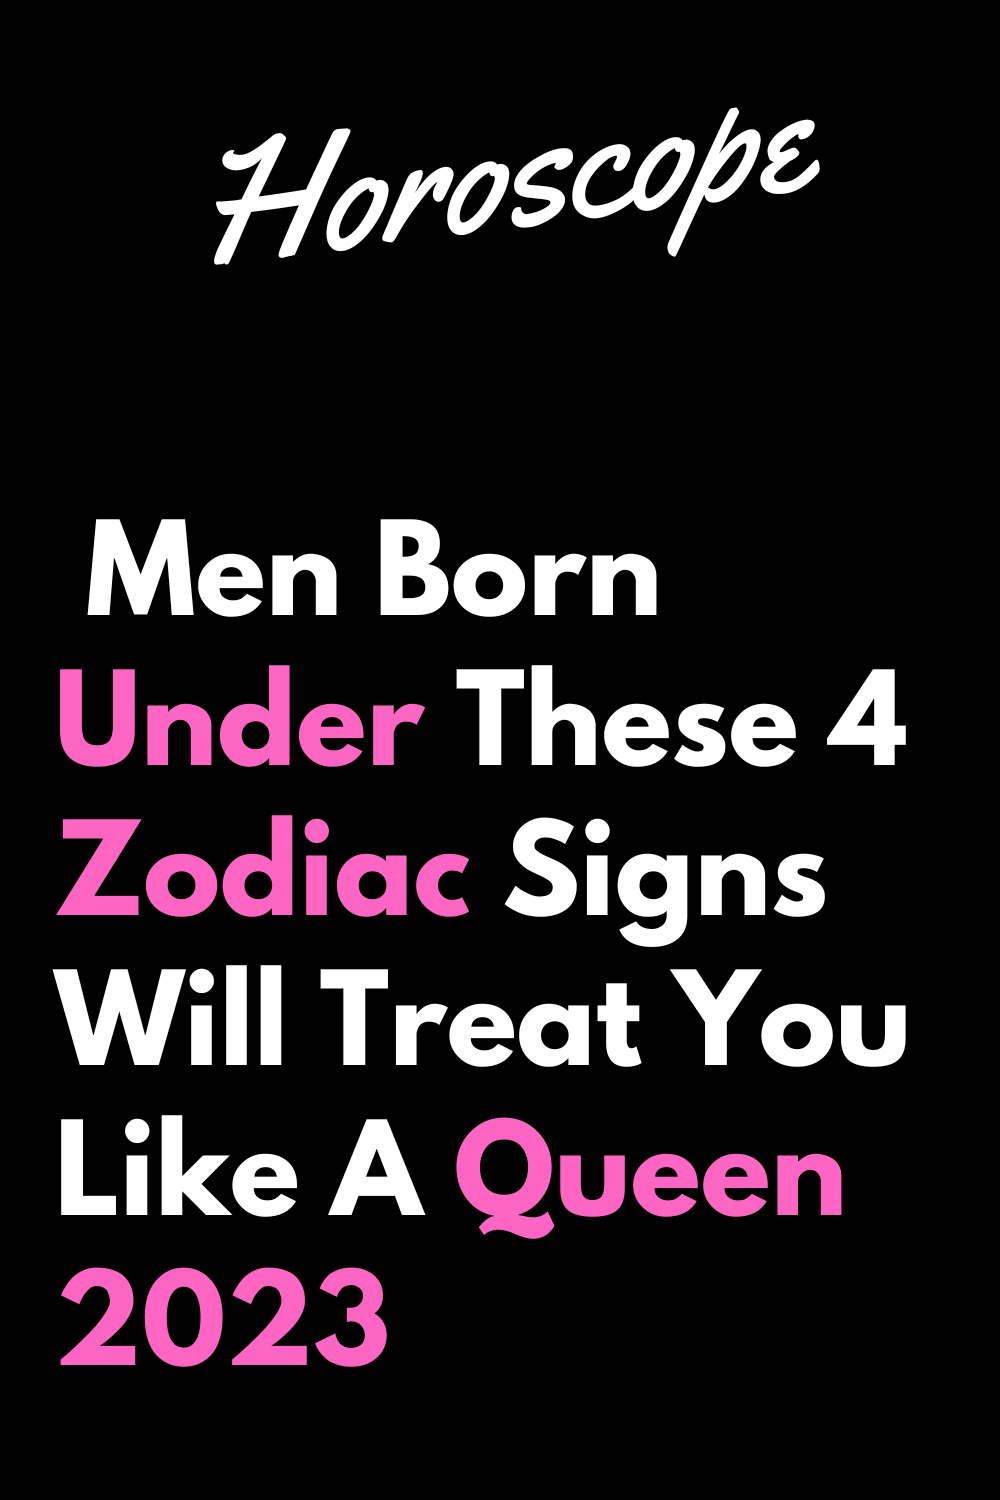 Men Born Under These 4 Zodiac Signs Will Treat You Like A Queen 2023 ...